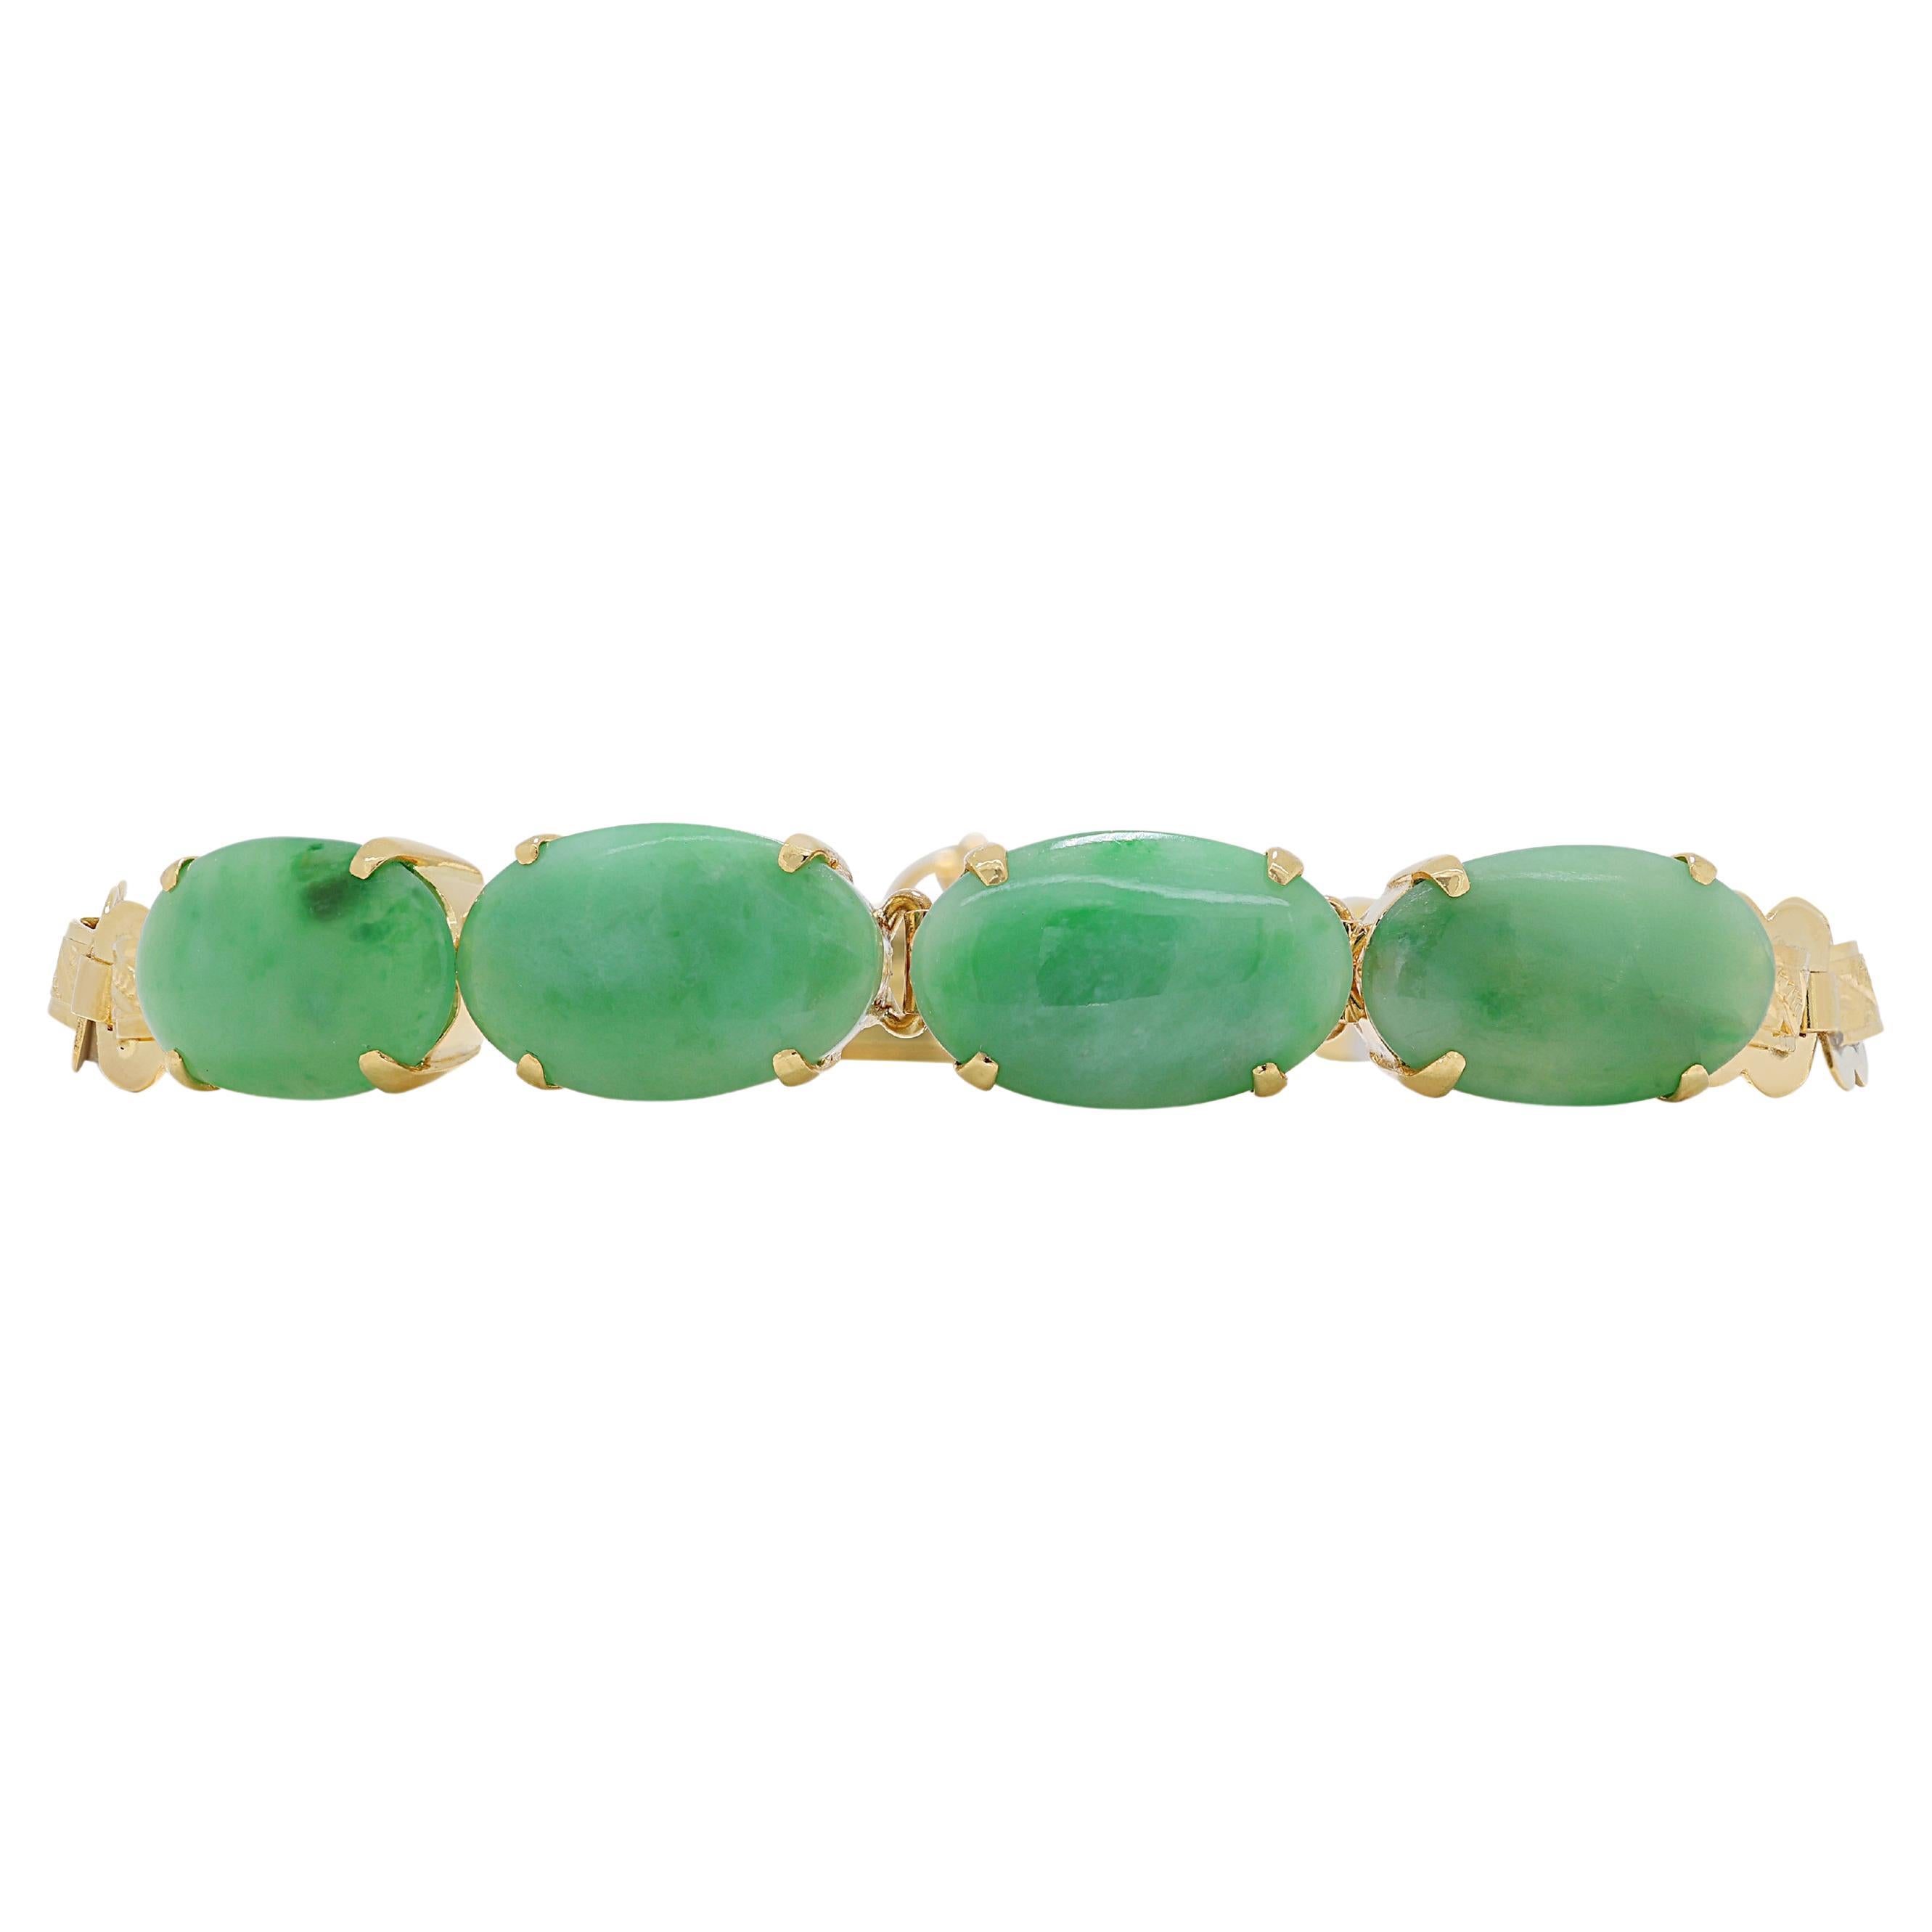 Magnificent 19.17ct Jade-Cabochon Bracelet in 22k Yellow Gold